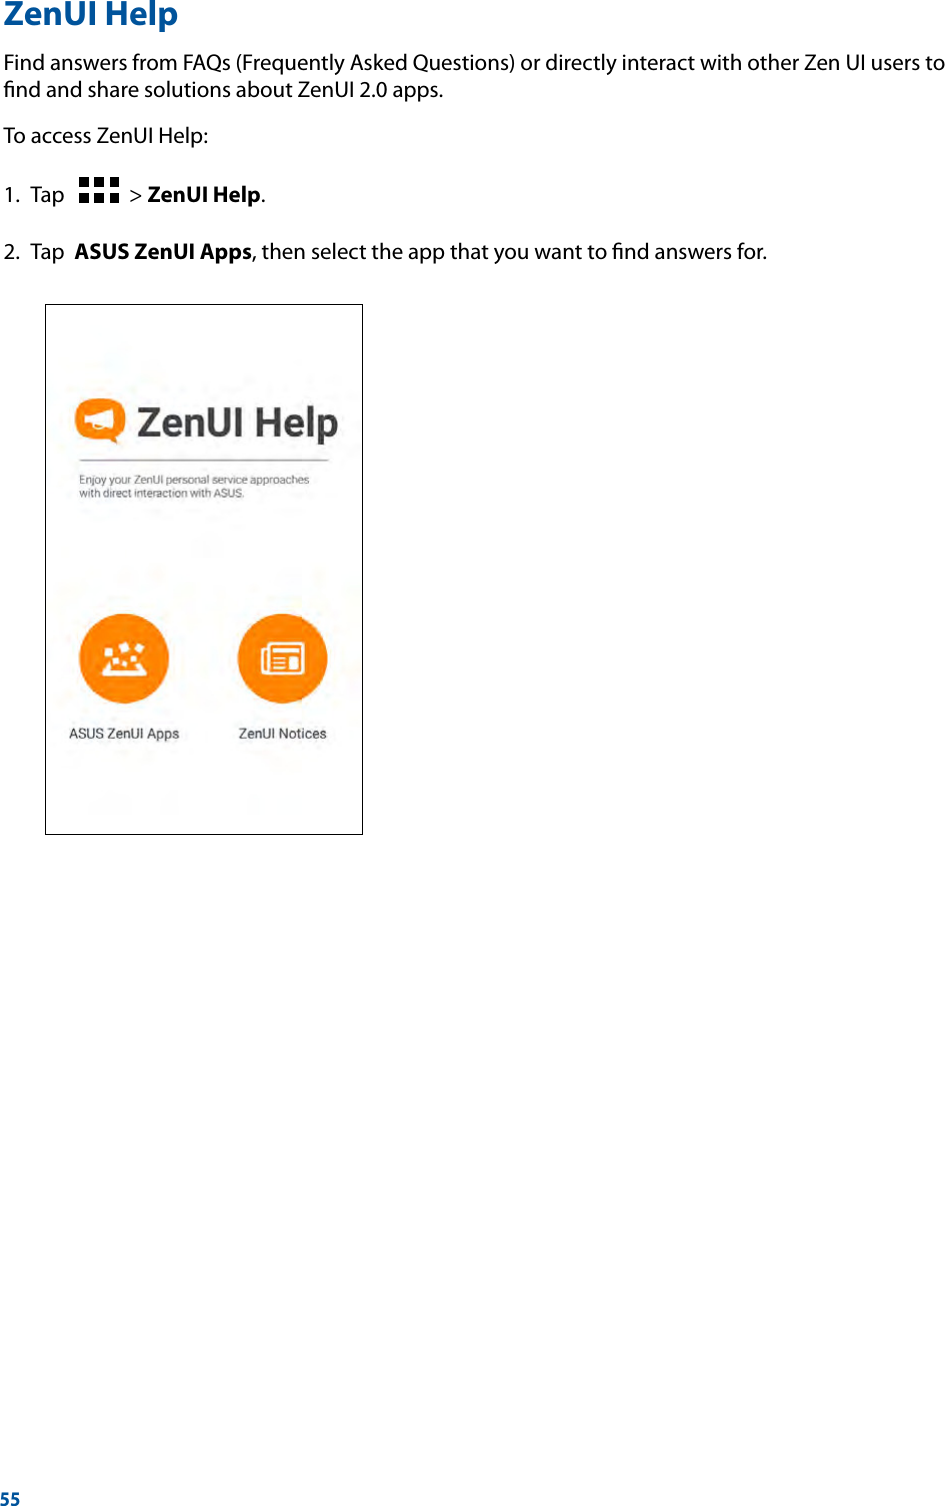 55ZenUI HelpFind answers from FAQs (Frequently Asked Questions) or directly interact with other Zen UI users to ﬁnd and share solutions about ZenUI 2.0 apps.To access ZenUI Help:1.  Tap      &gt; ZenUI Help.2.  Tap  ASUS ZenUI Apps, then select the app that you want to ﬁnd answers for.